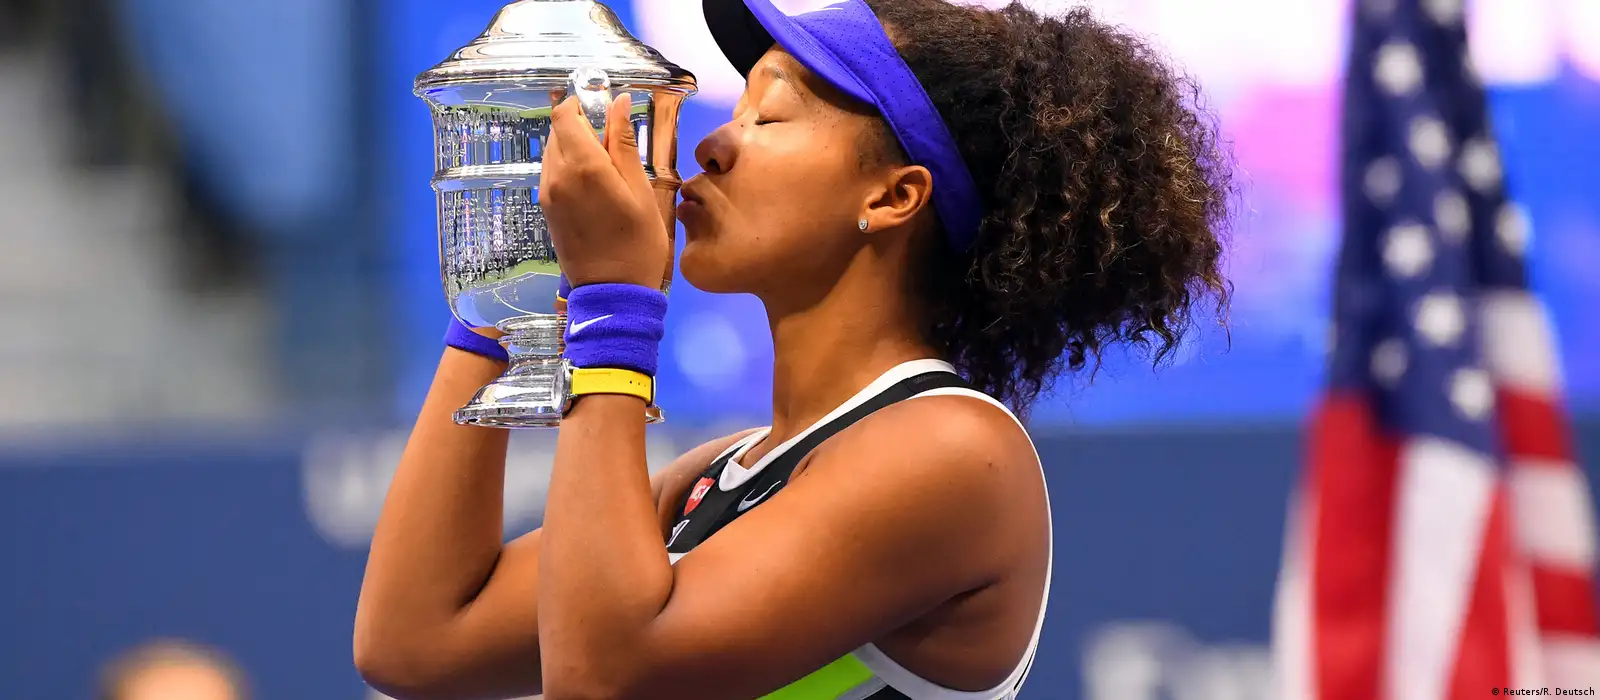 How Naomi Osaka is using masks to make statement on one of world's biggest  tennis stages - Good Morning America